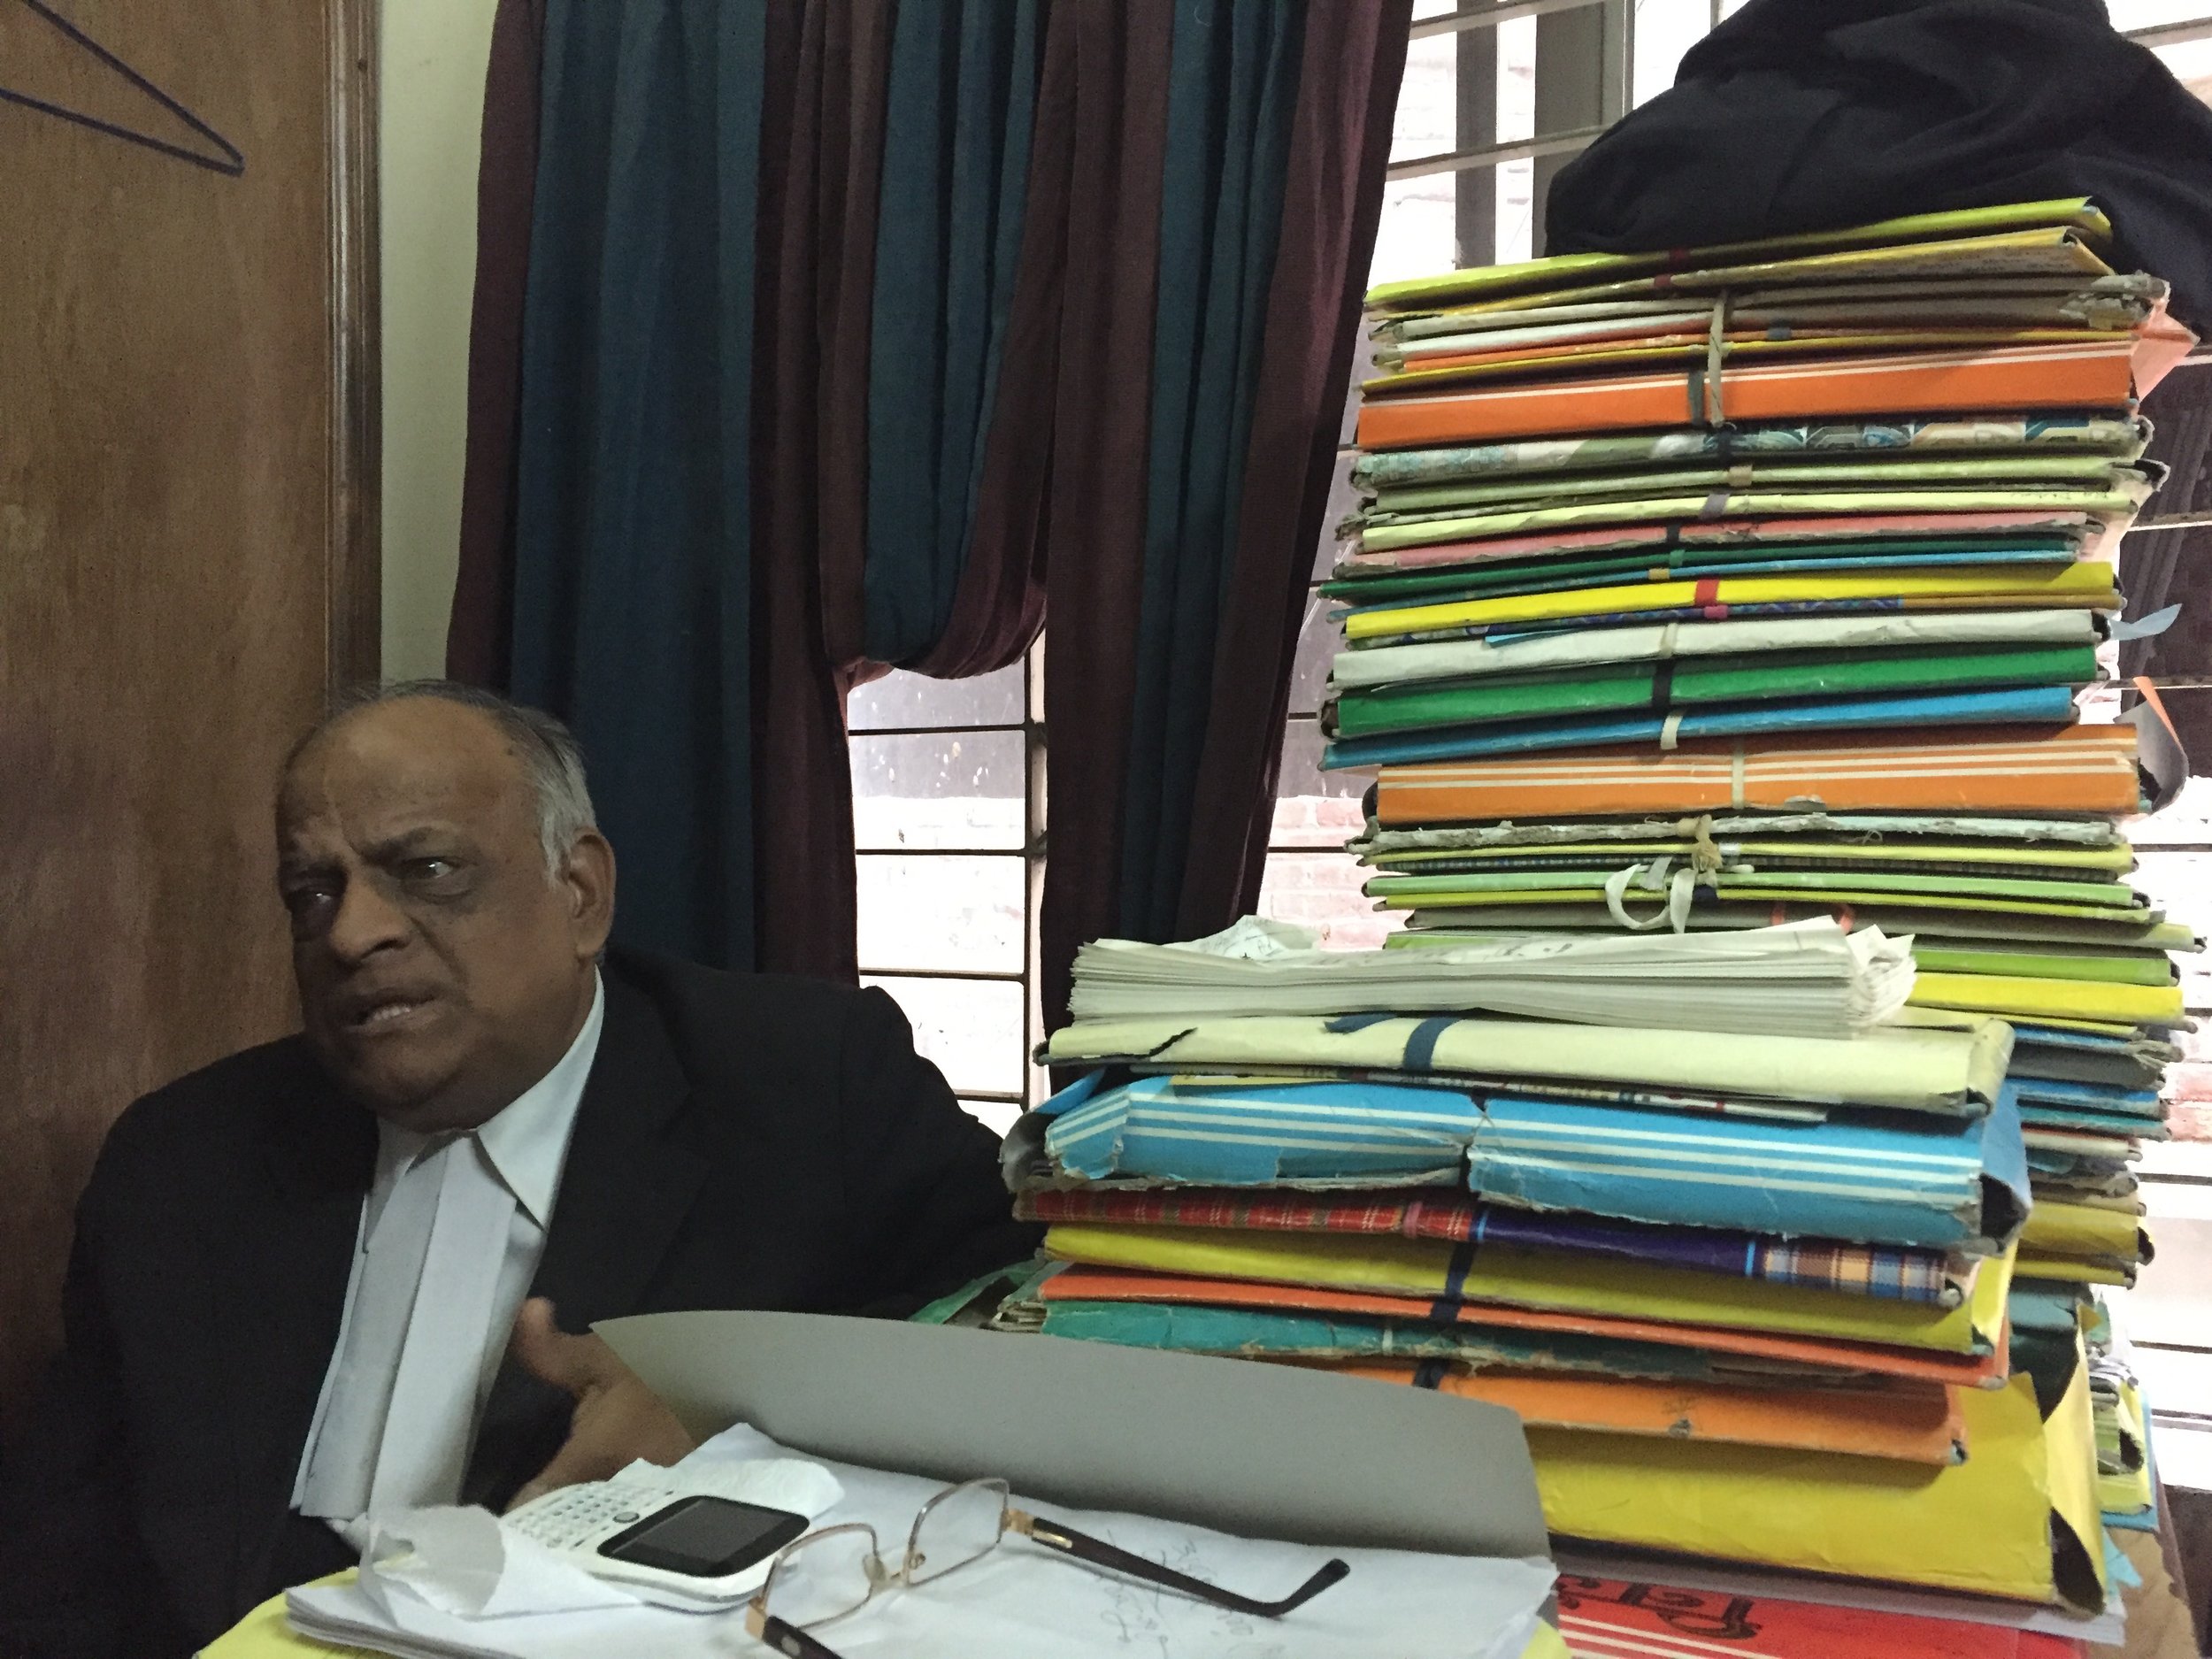  DHAKA | Meeting Rabindra Ghosh, a human rights lawyer defending minority rights. To the right a pile of cases filed by Hindus who have been forcibly evicted from their homes, assaulted and threatened. Bangladesh's minorities - Hindus, Christians, Bu